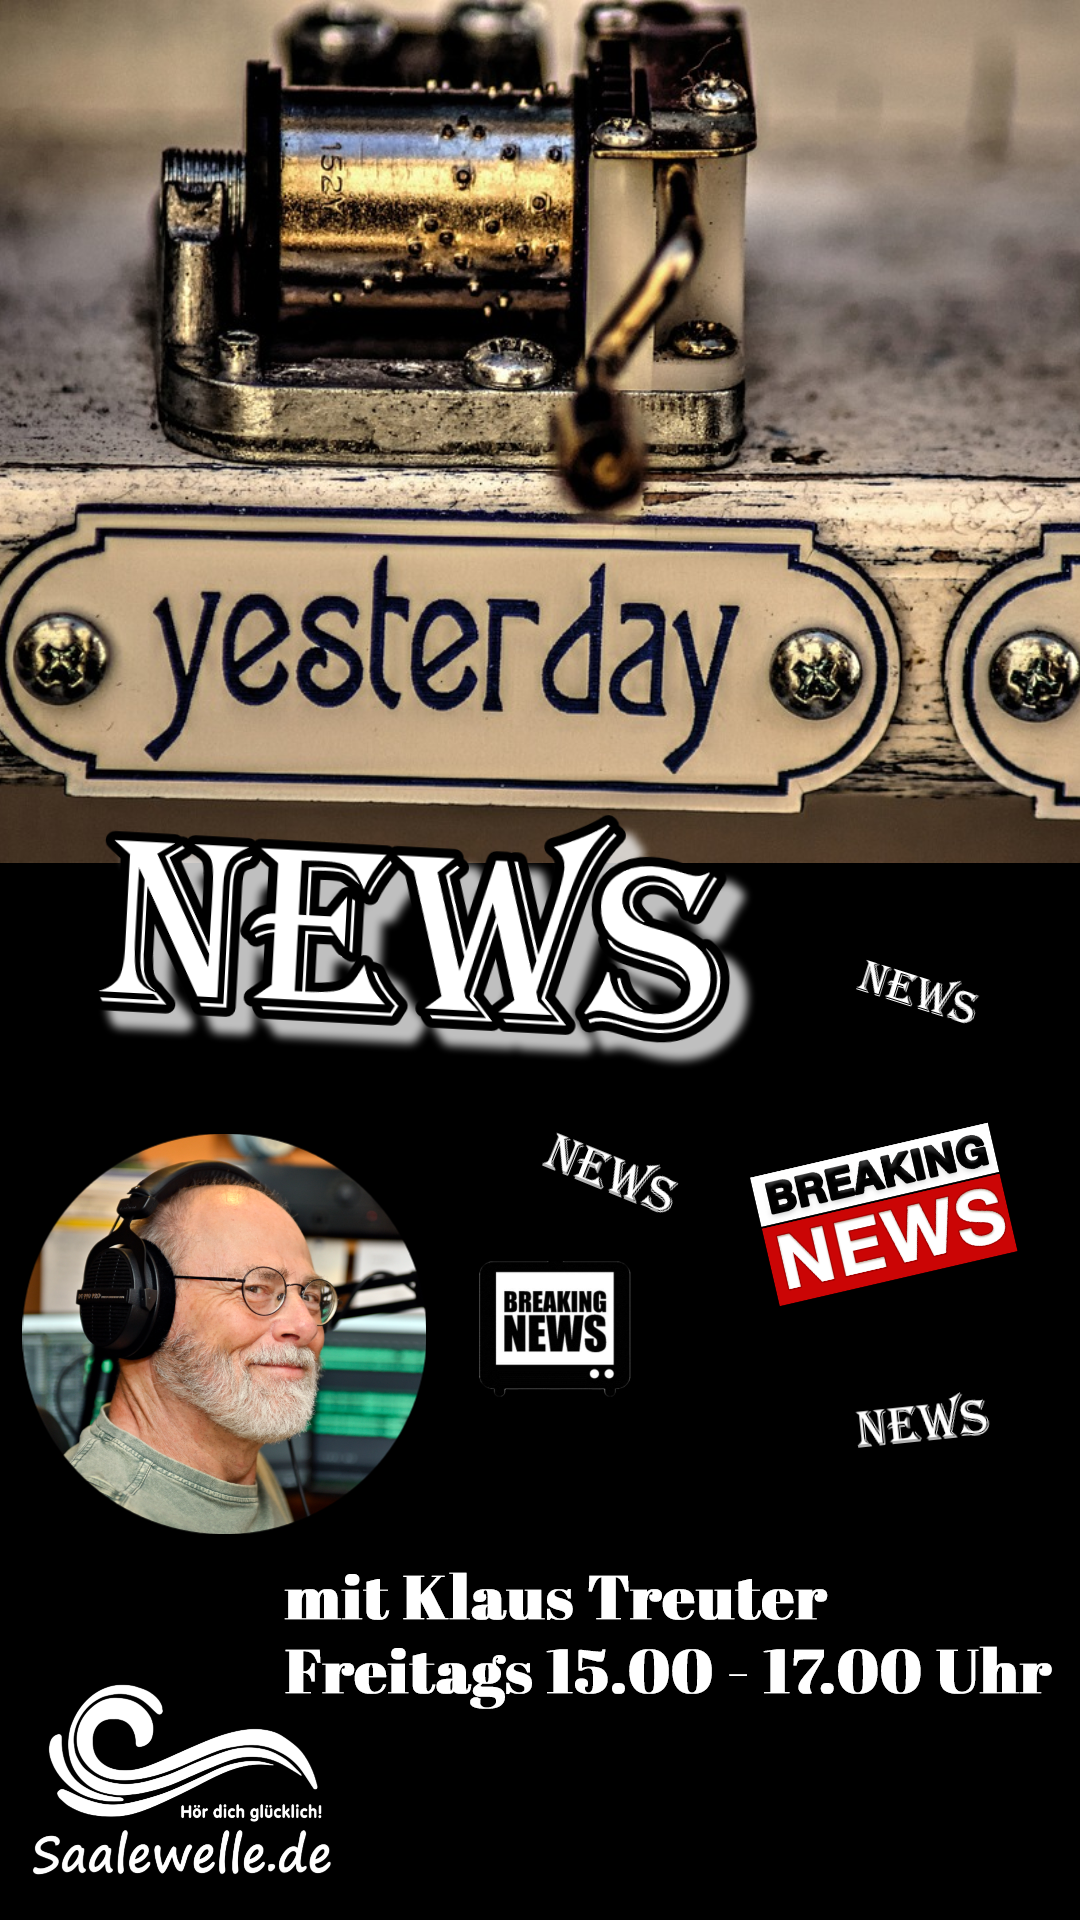 Yesterday News long.png (2.00 MB)